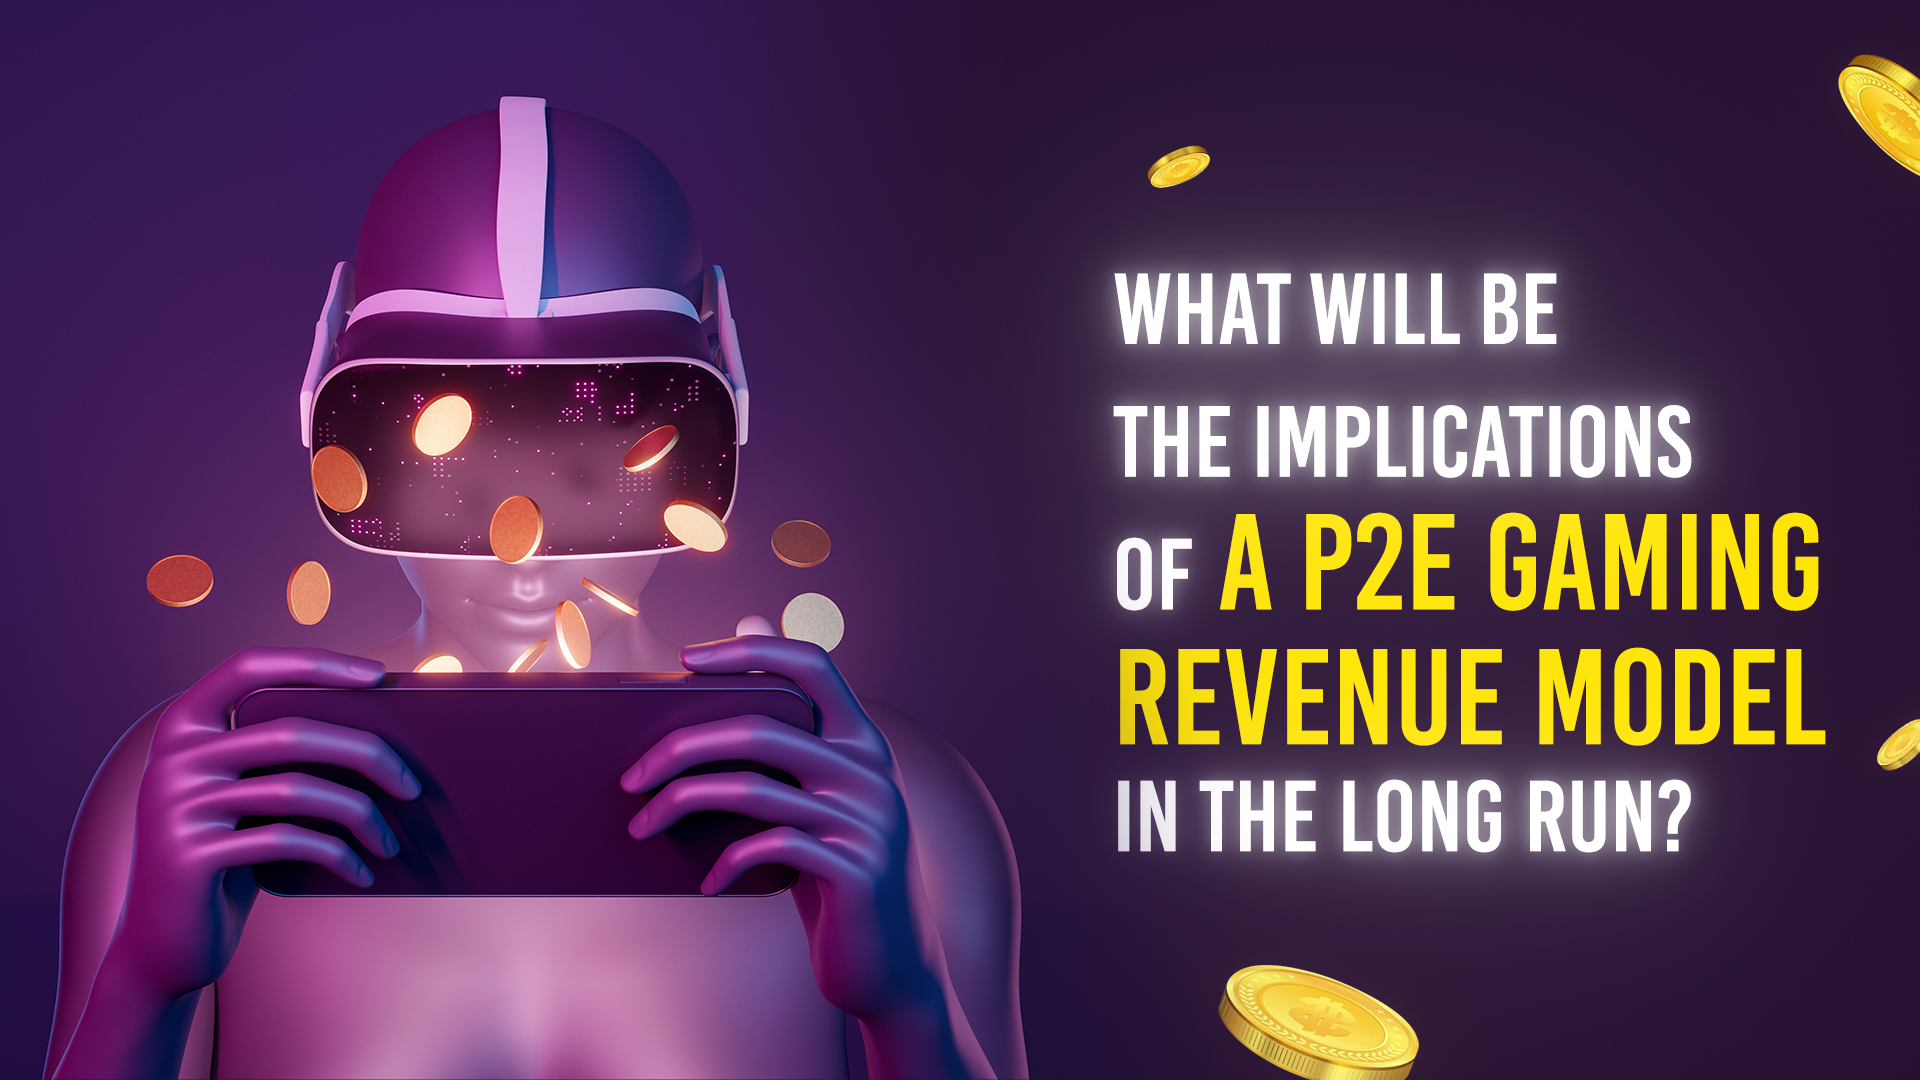 What Will Be The Implications Of A P2E Gaming Revenue Model In The Long Run?